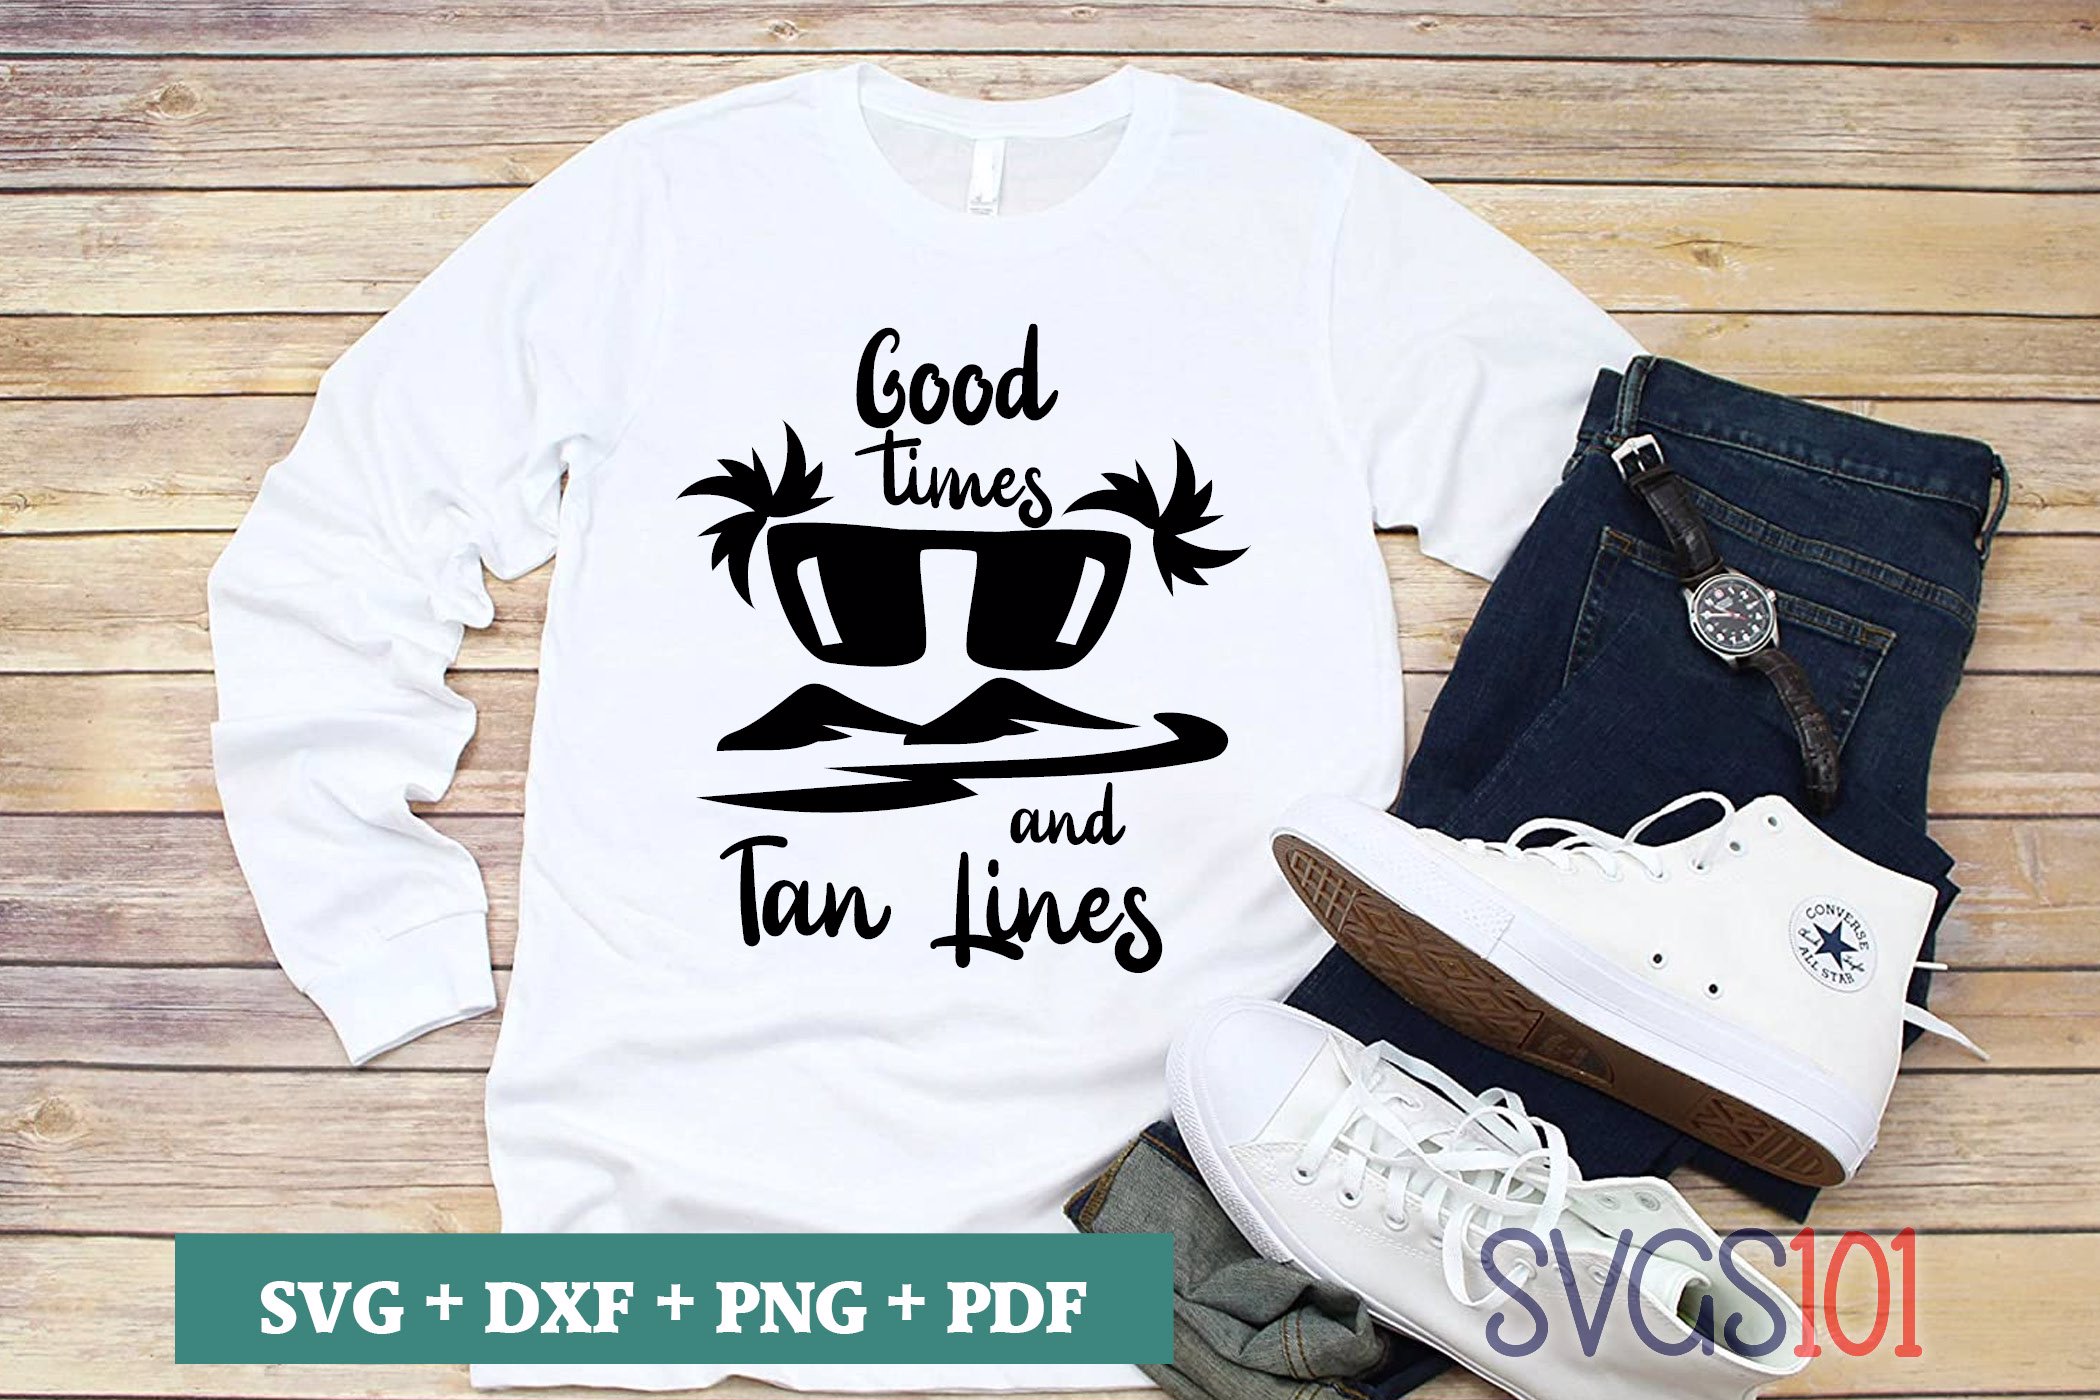 Good Times And Tan Lines SVG Cuttable file - DXF, EPS, PNG, PDF | SVG ...